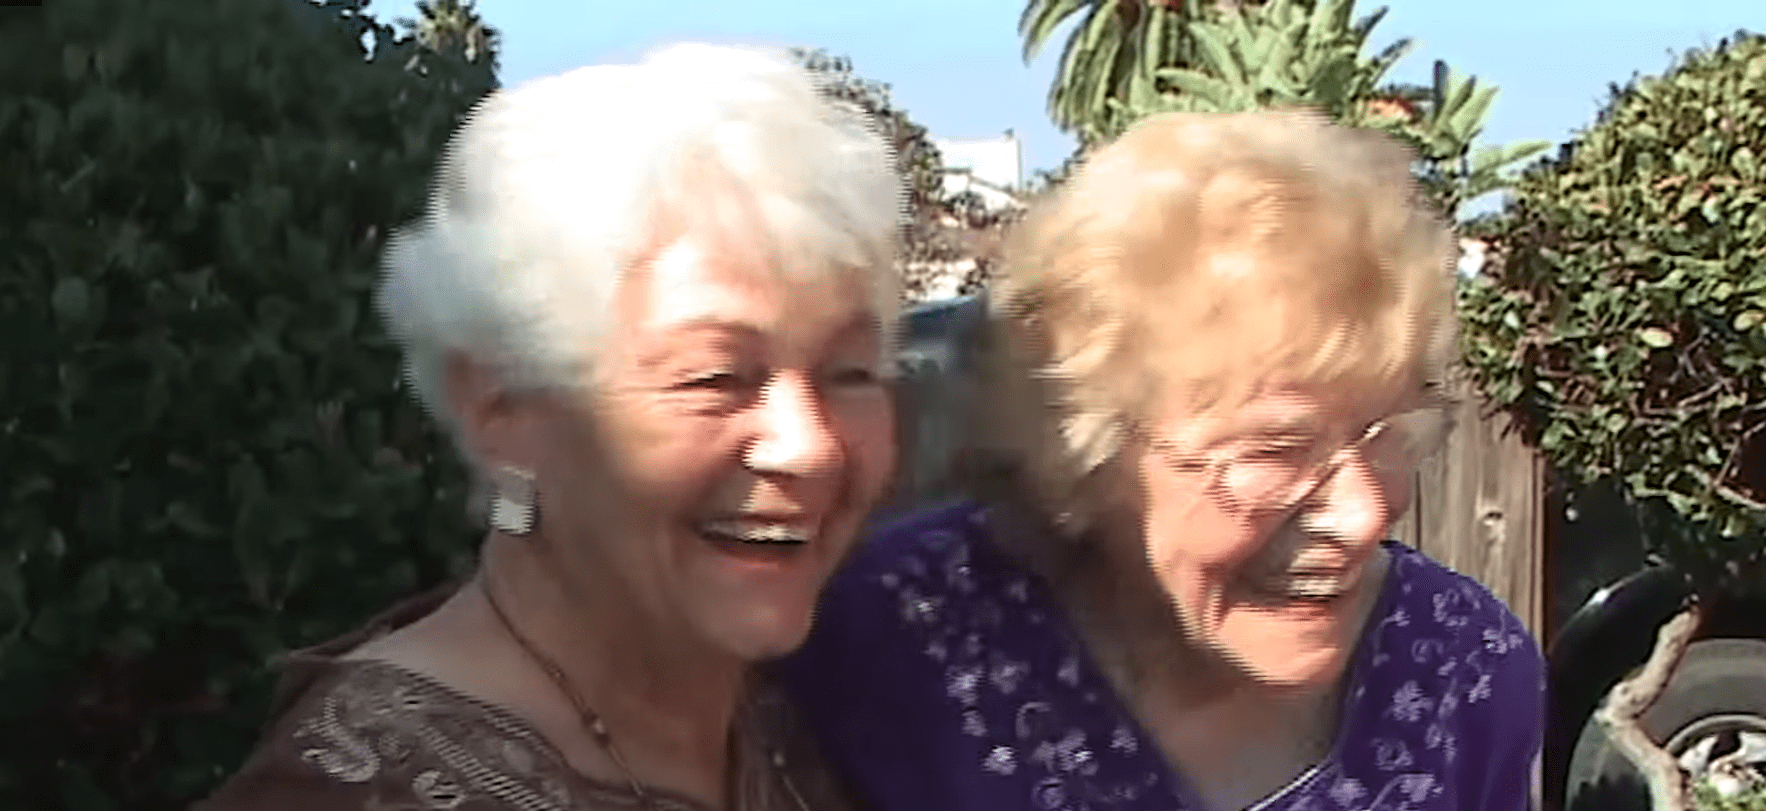 Minka Disbrow and Ruth Lee laughing together. | Source: youtube.com/Tyndale House Publishers